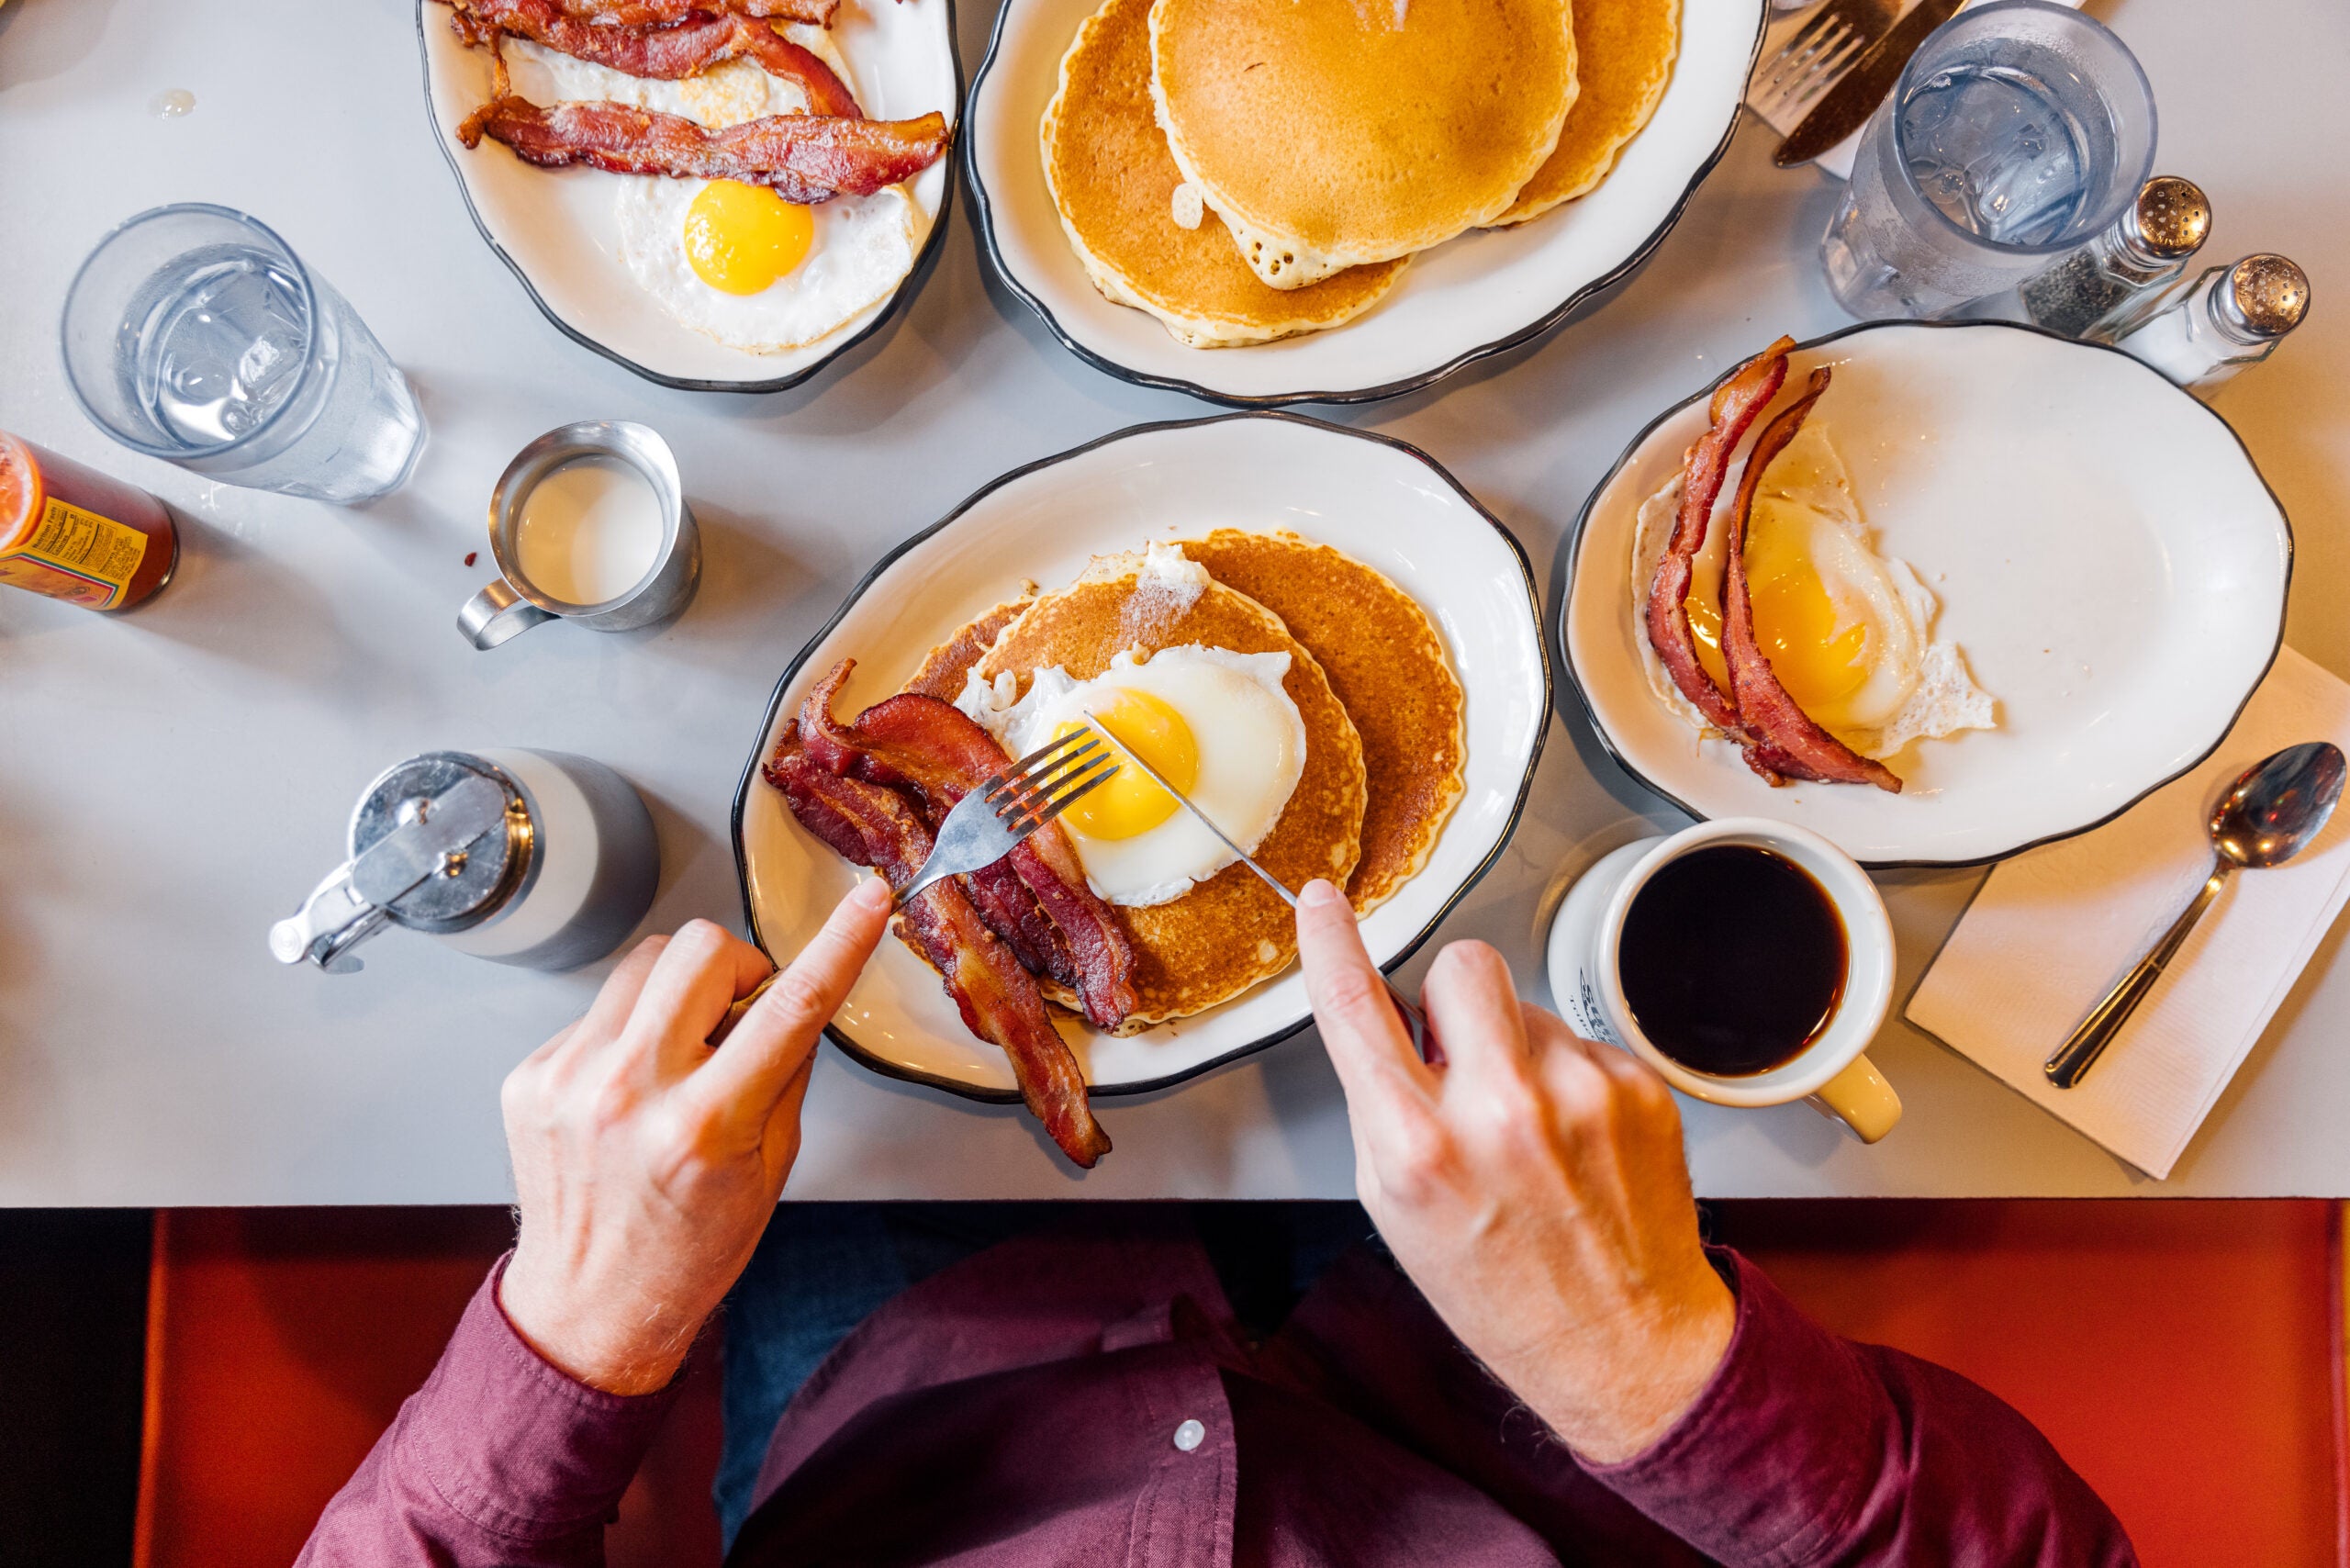 Man eating pancakes with bacon and eggs in a traditional American diner, personal perspective overhead view